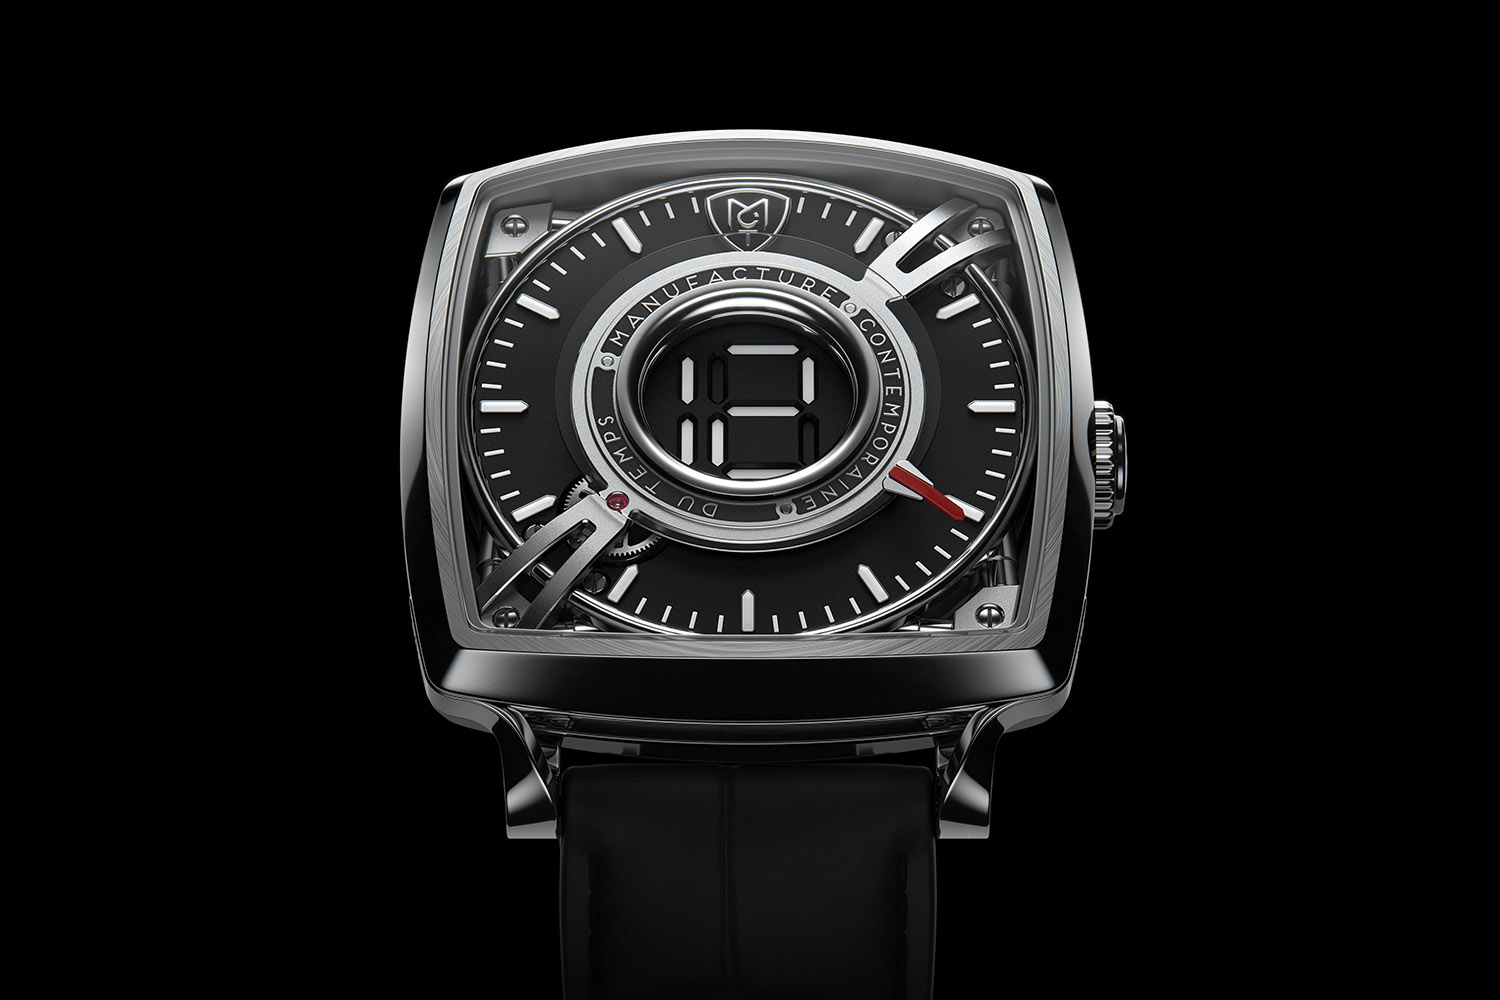 MCT Dodekal One D110 - Baselworld 2017